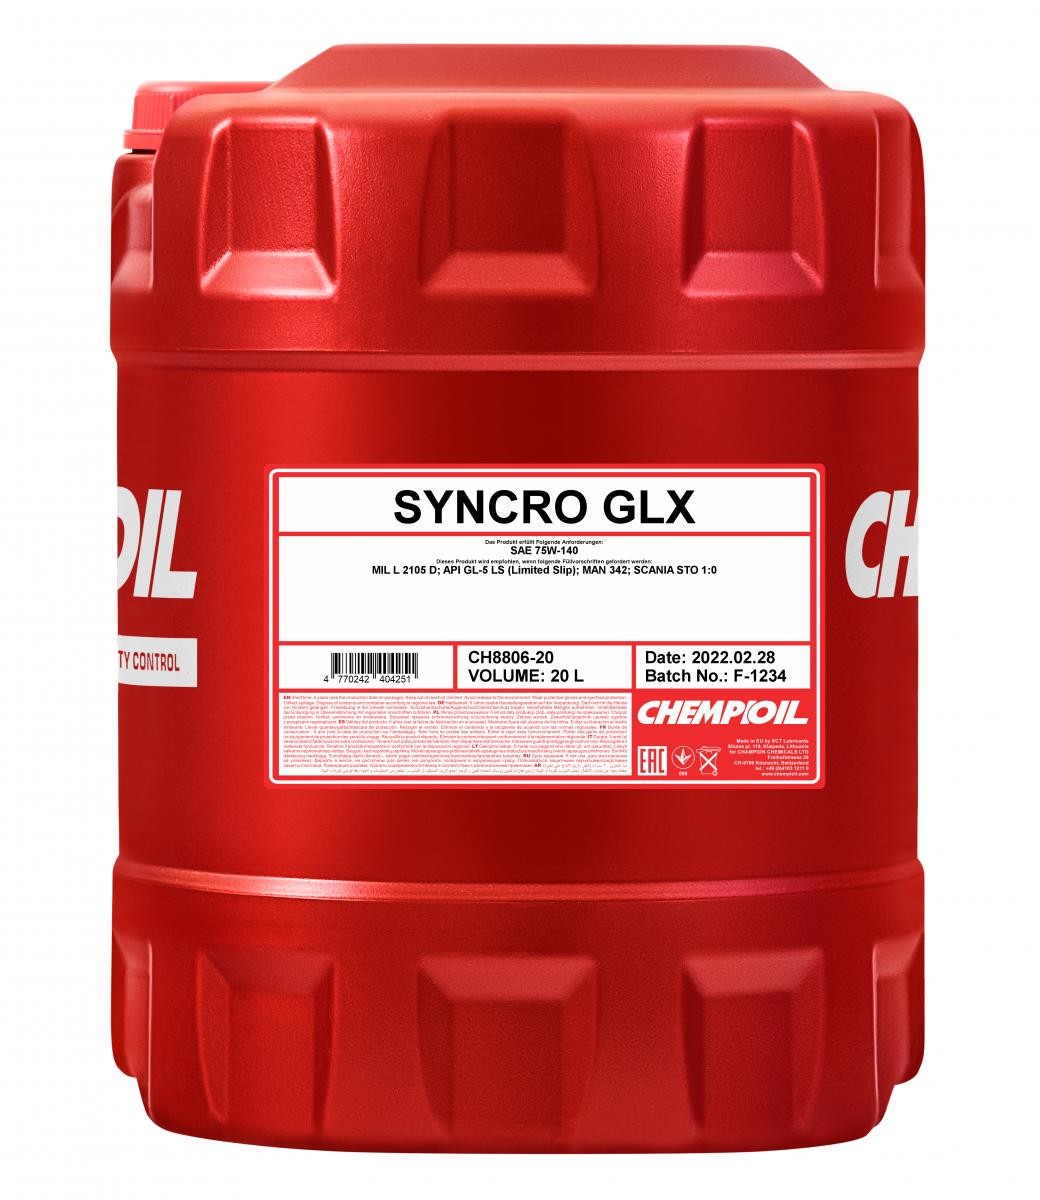 CHEMPIOIL Syncro, GLX 75W-140, Capacity: 20l API GL-5, MIL-L-2105 D, MAN 342, Scania STO 1:0, Manual Transmission, Differential Gear with limited slip Transmission oil CH8806-20 buy